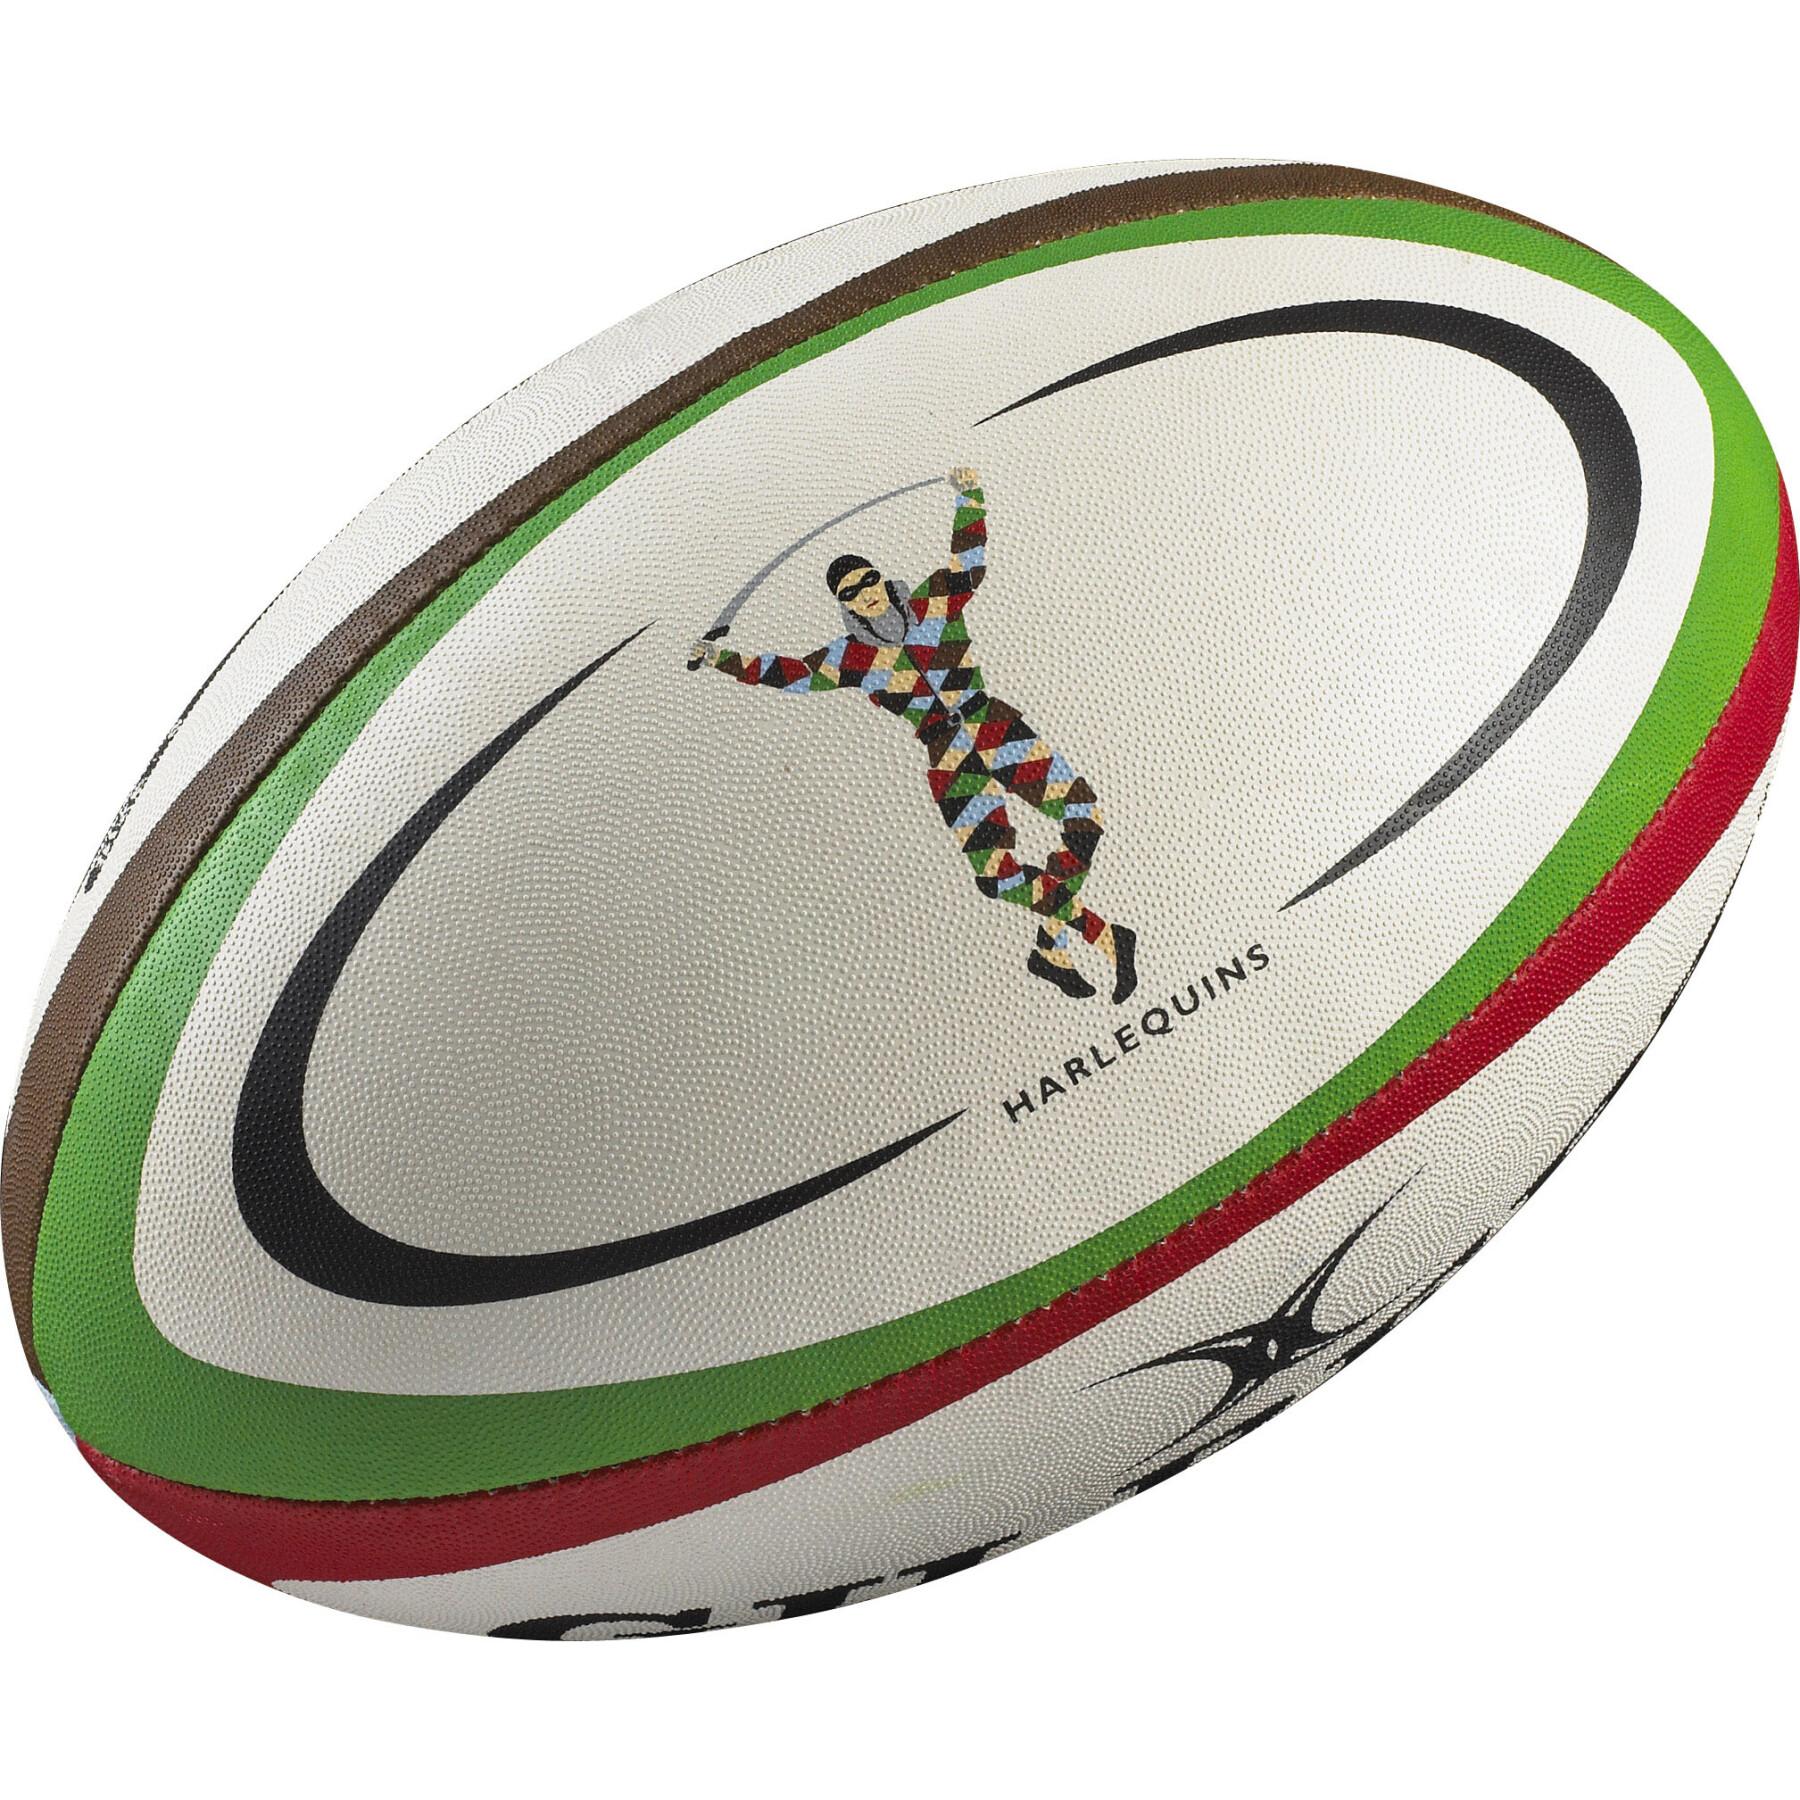 Midi rugbyboll Gilbert Harlequins (taille 2)